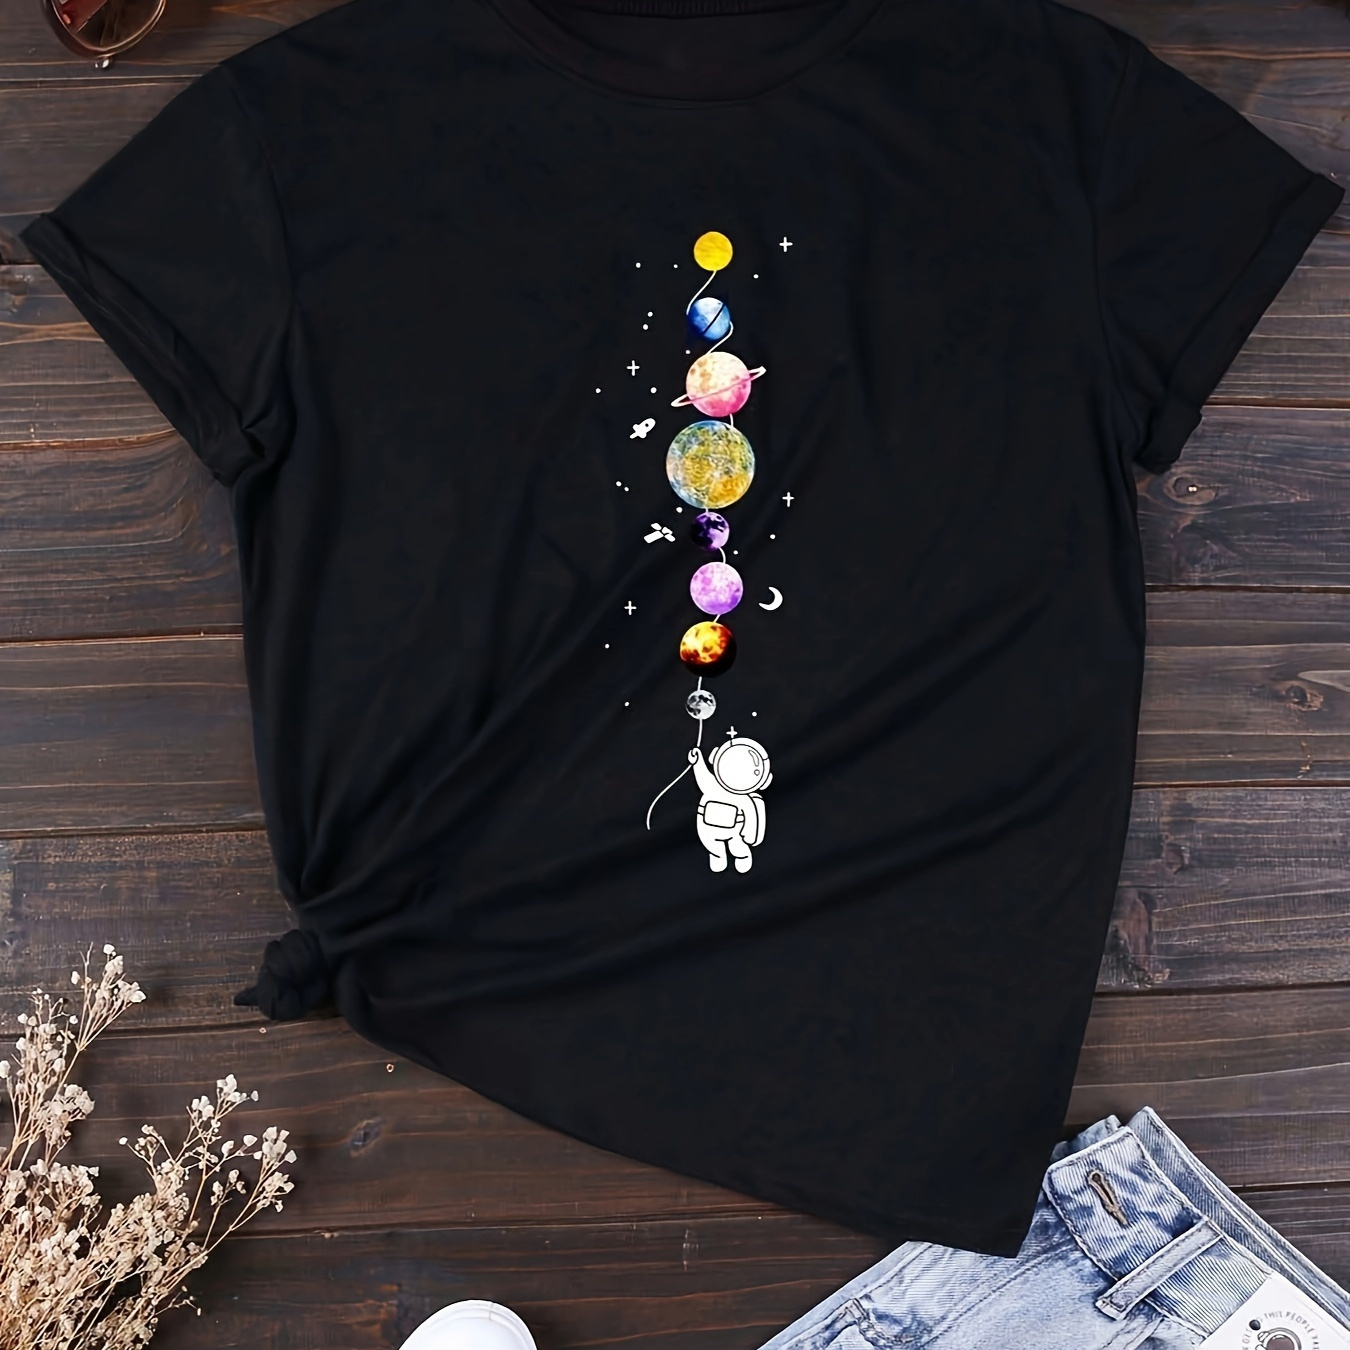 

Astronaut & Planet Print Crew Neck T-shirt, Casual Short Sleeve T-shirt For Spring & Summer, Women's Clothing